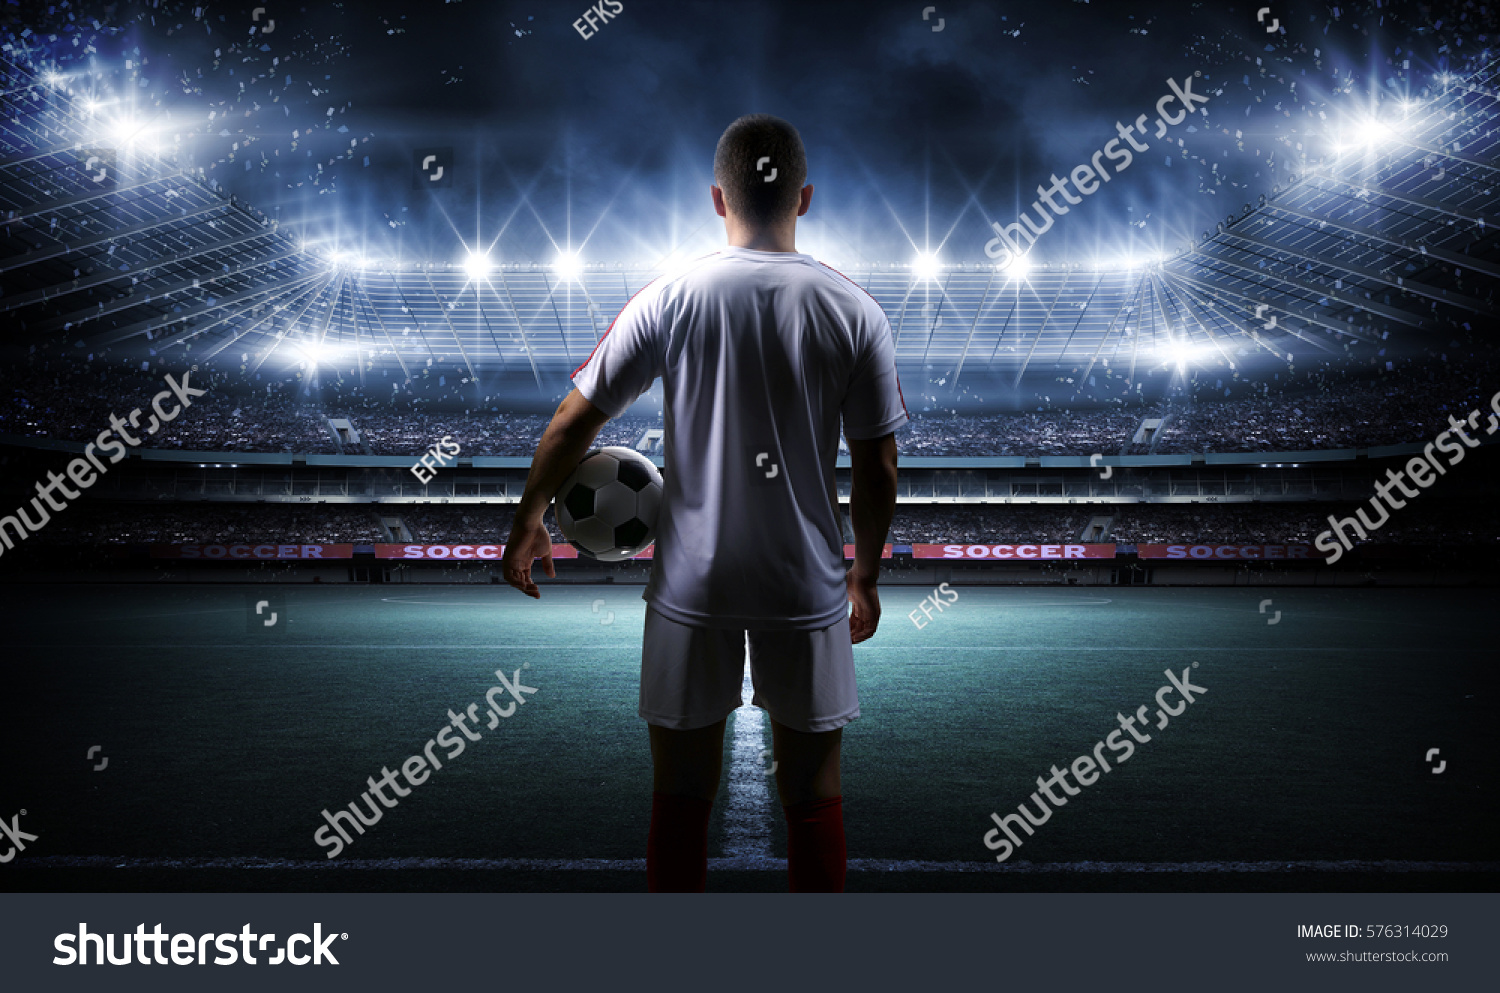 Football player with ball on field of stadium #576314029